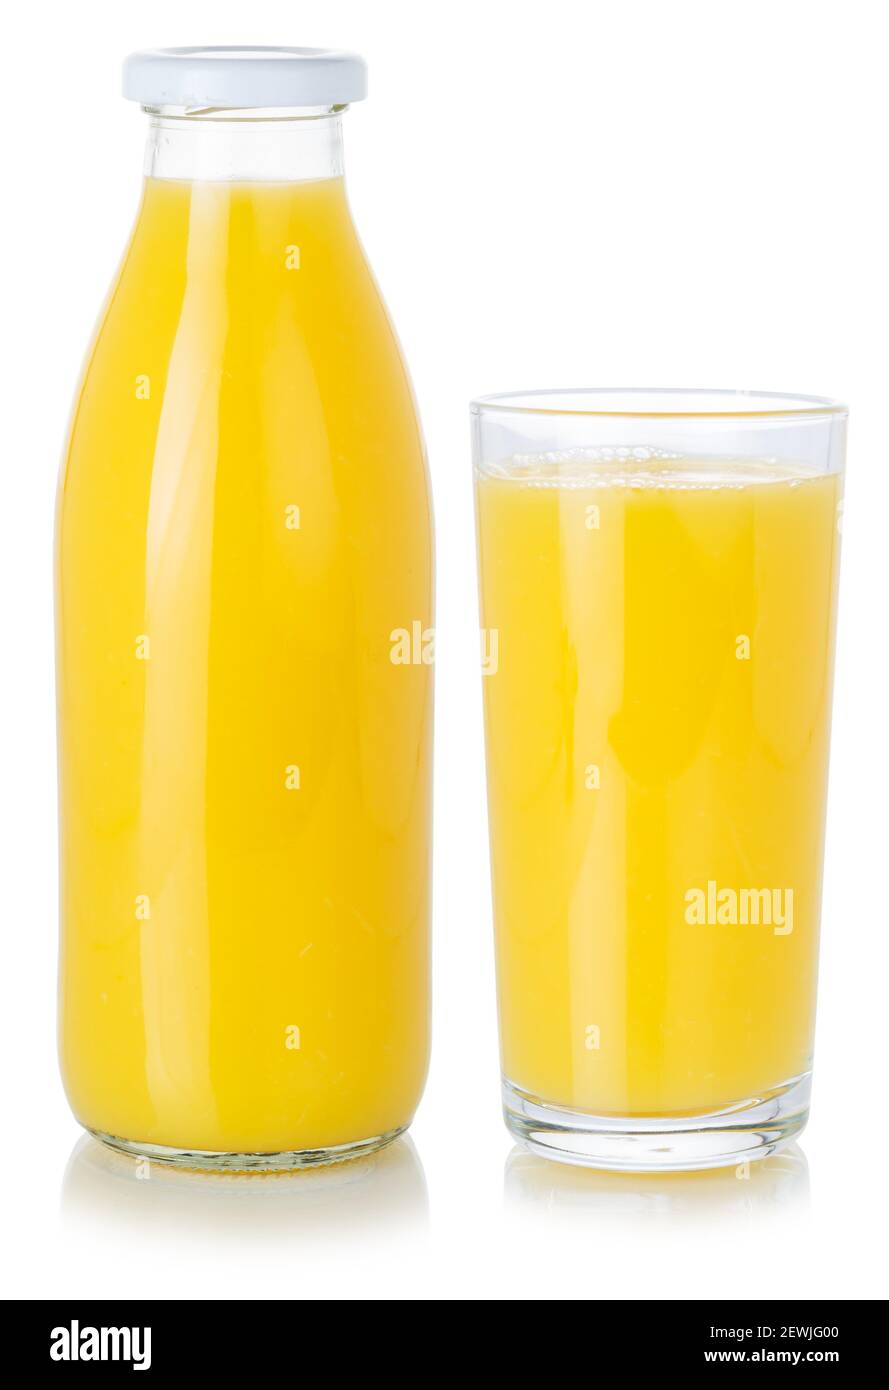 Fruit juice orange smoothie drink beverage in a bottle and glass isolated on a white background. Stock Photo